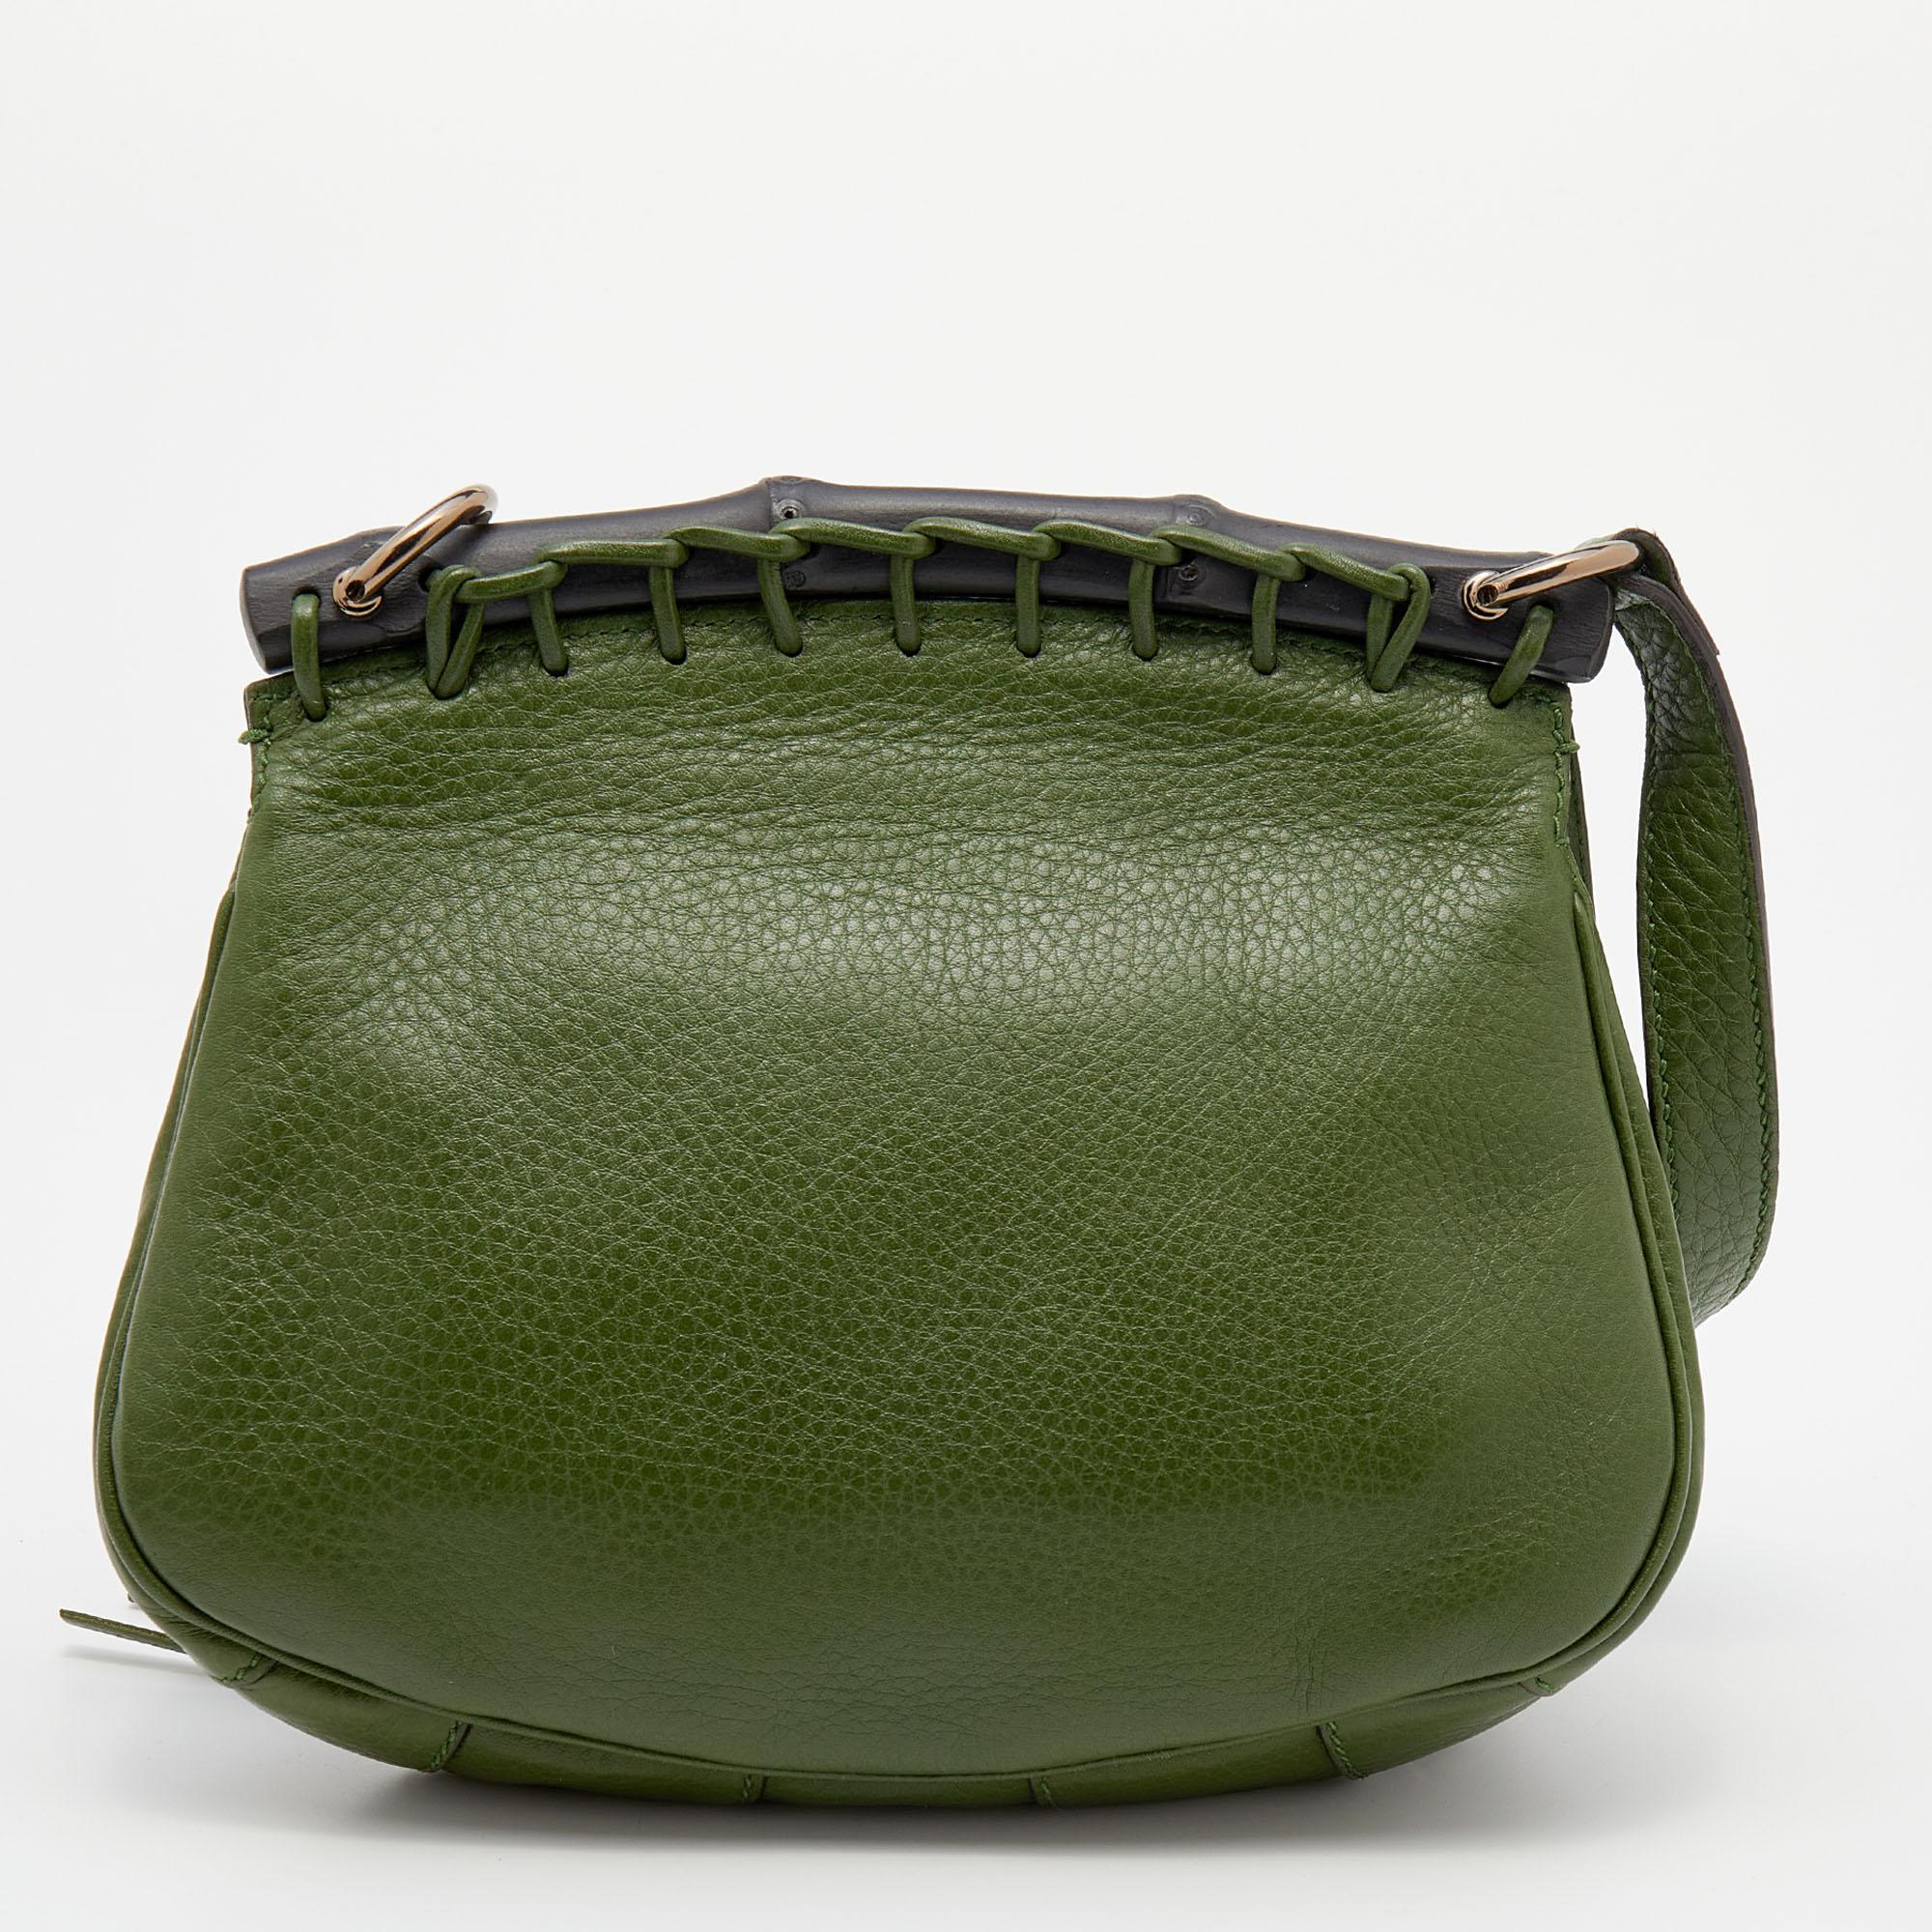 With a timeless charm and a contemporary design, this Gucci bag is the epitome of feminine style. It is enriched with striking details and is an ideal option if you wish to travel light. Created from leather, it is elevated with a bamboo-detailed